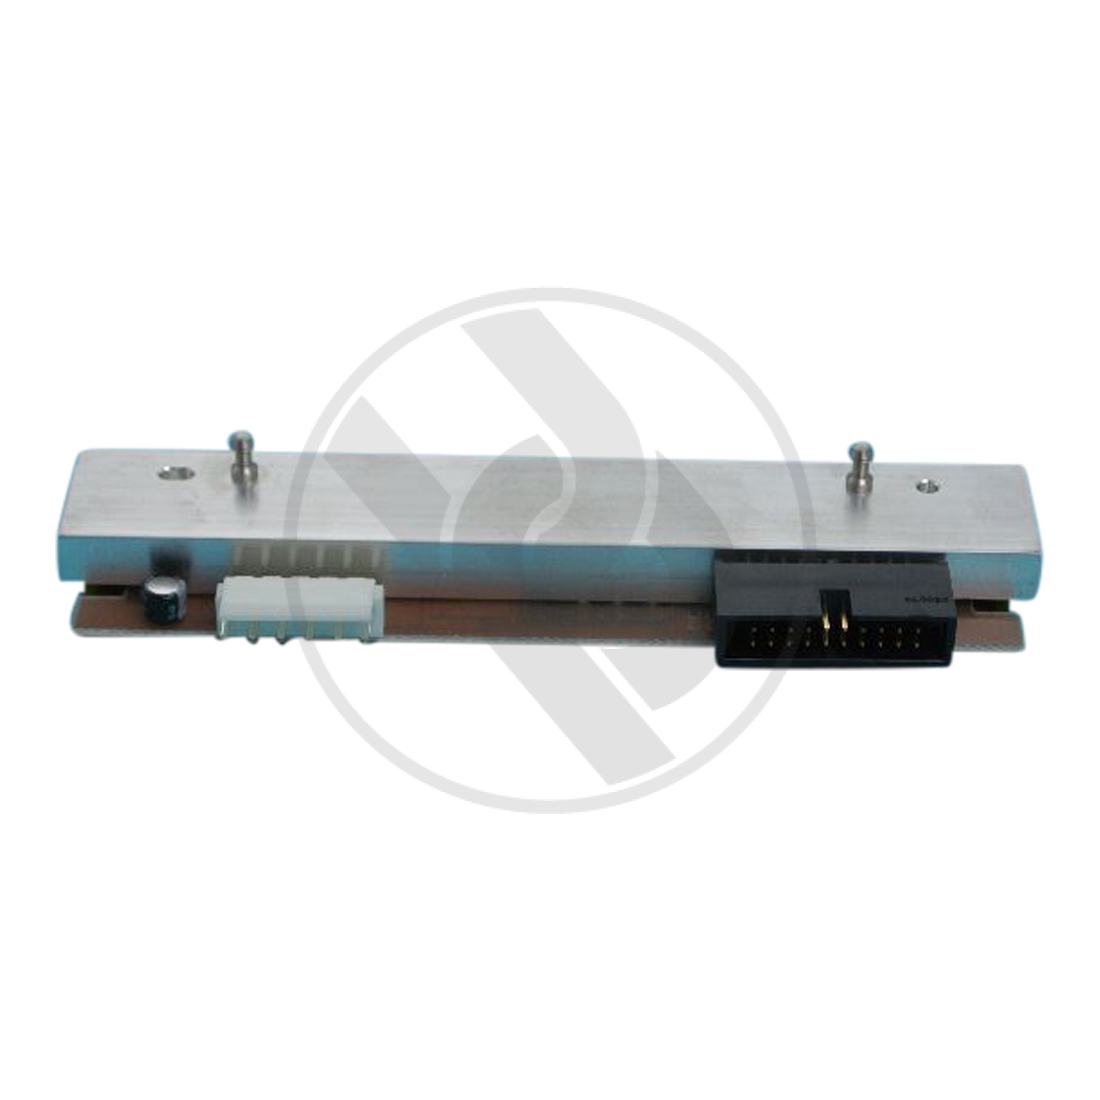 Thermal printhead 128 mm, for Domino, with pins